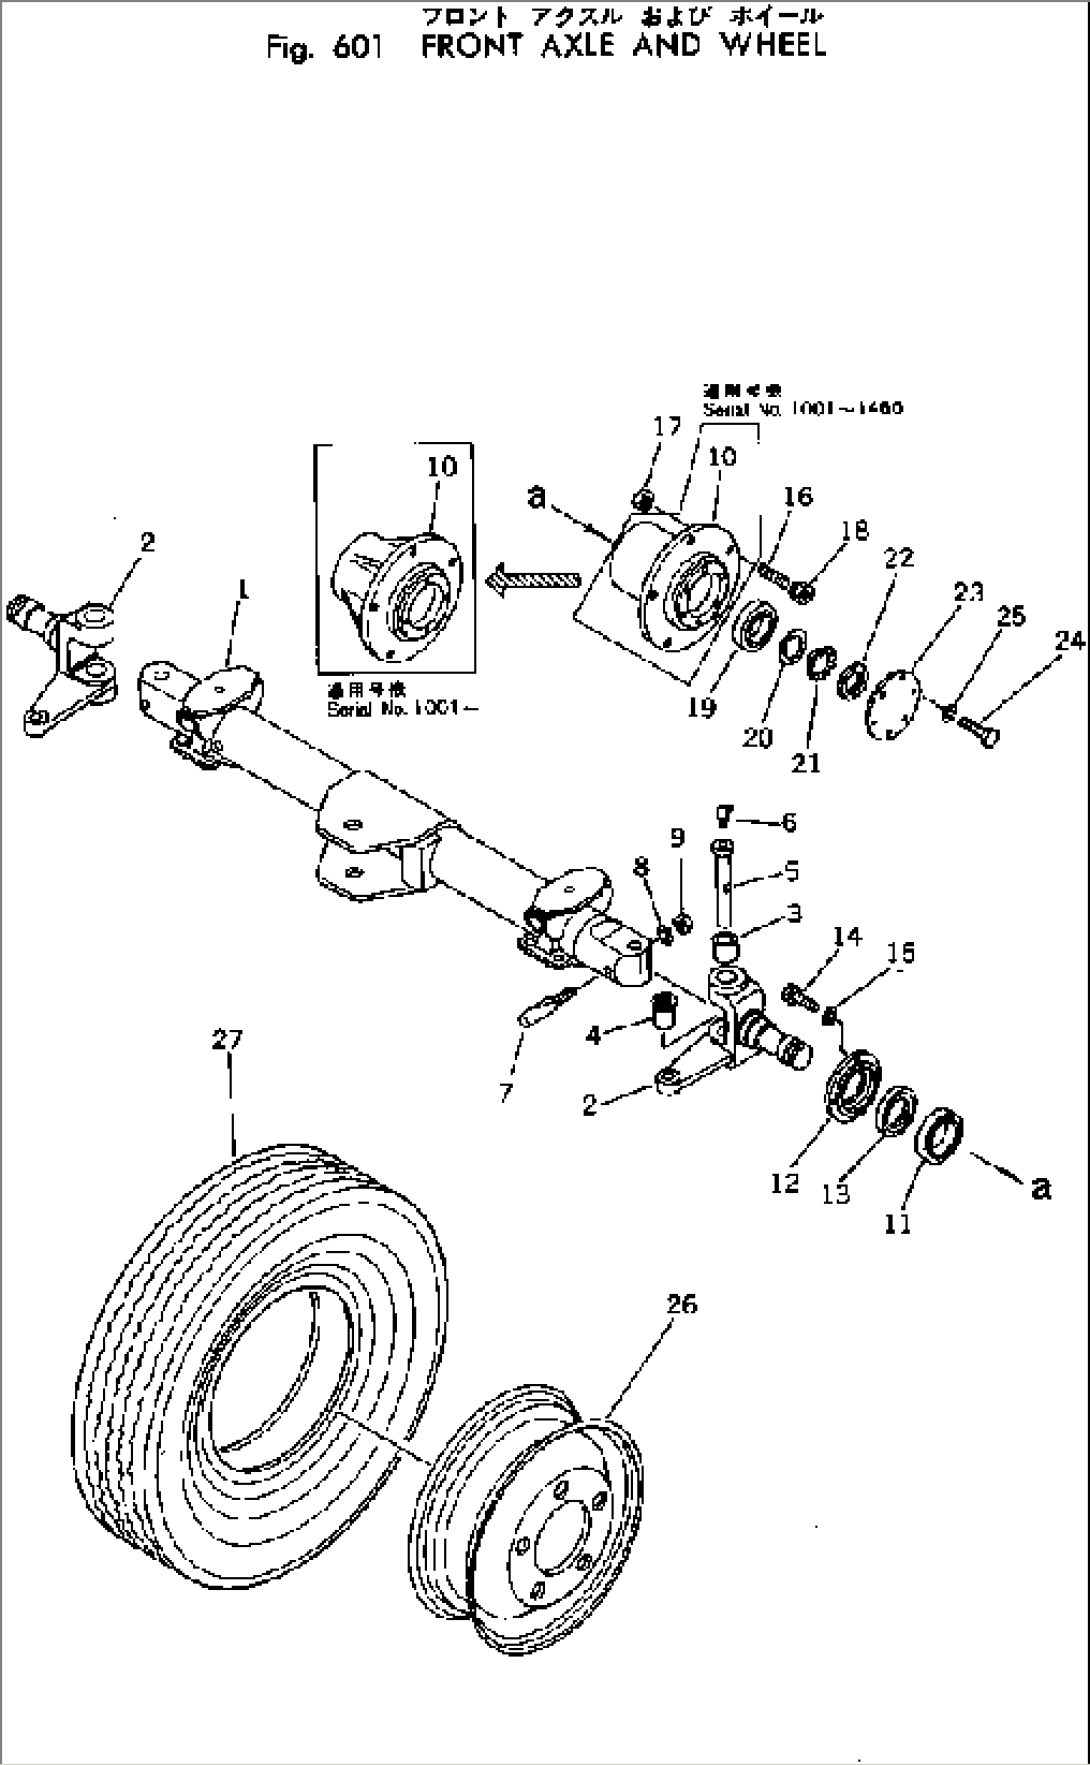 FRONT AXLE AND WHEEL